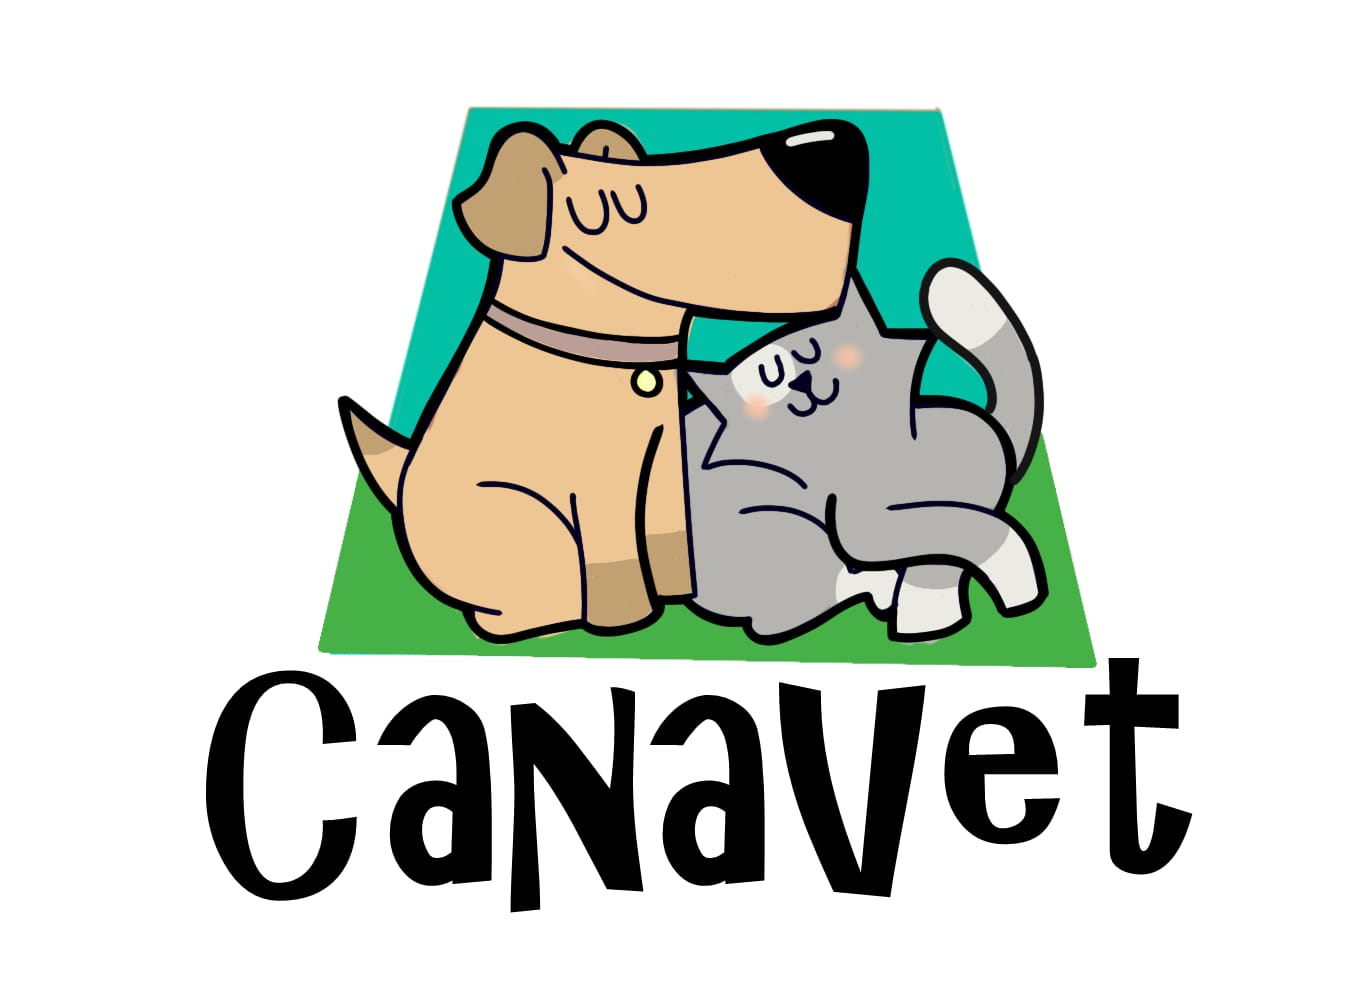 Canavet